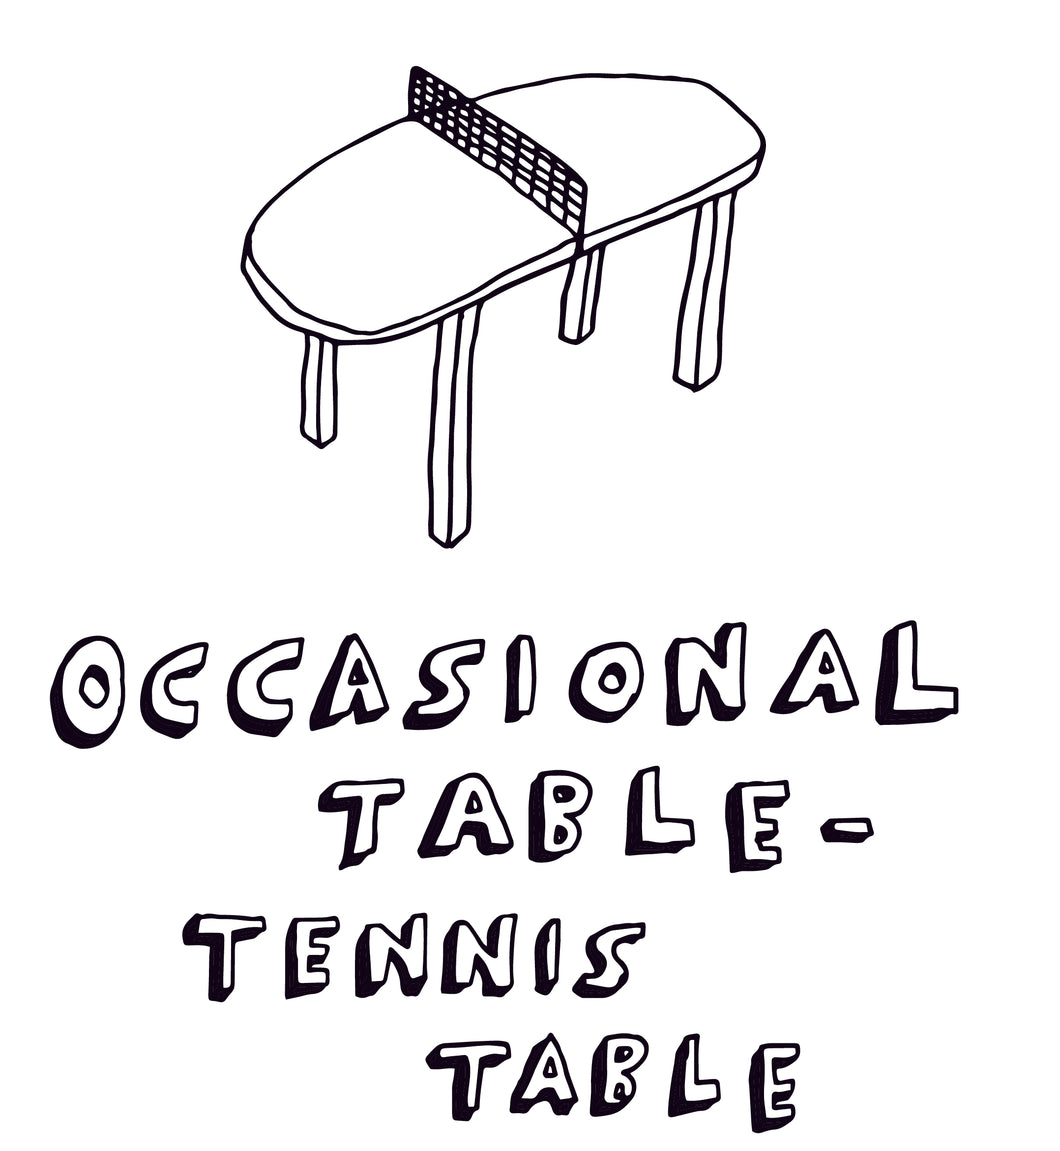 Occasional Table-Tennis Table greetings card